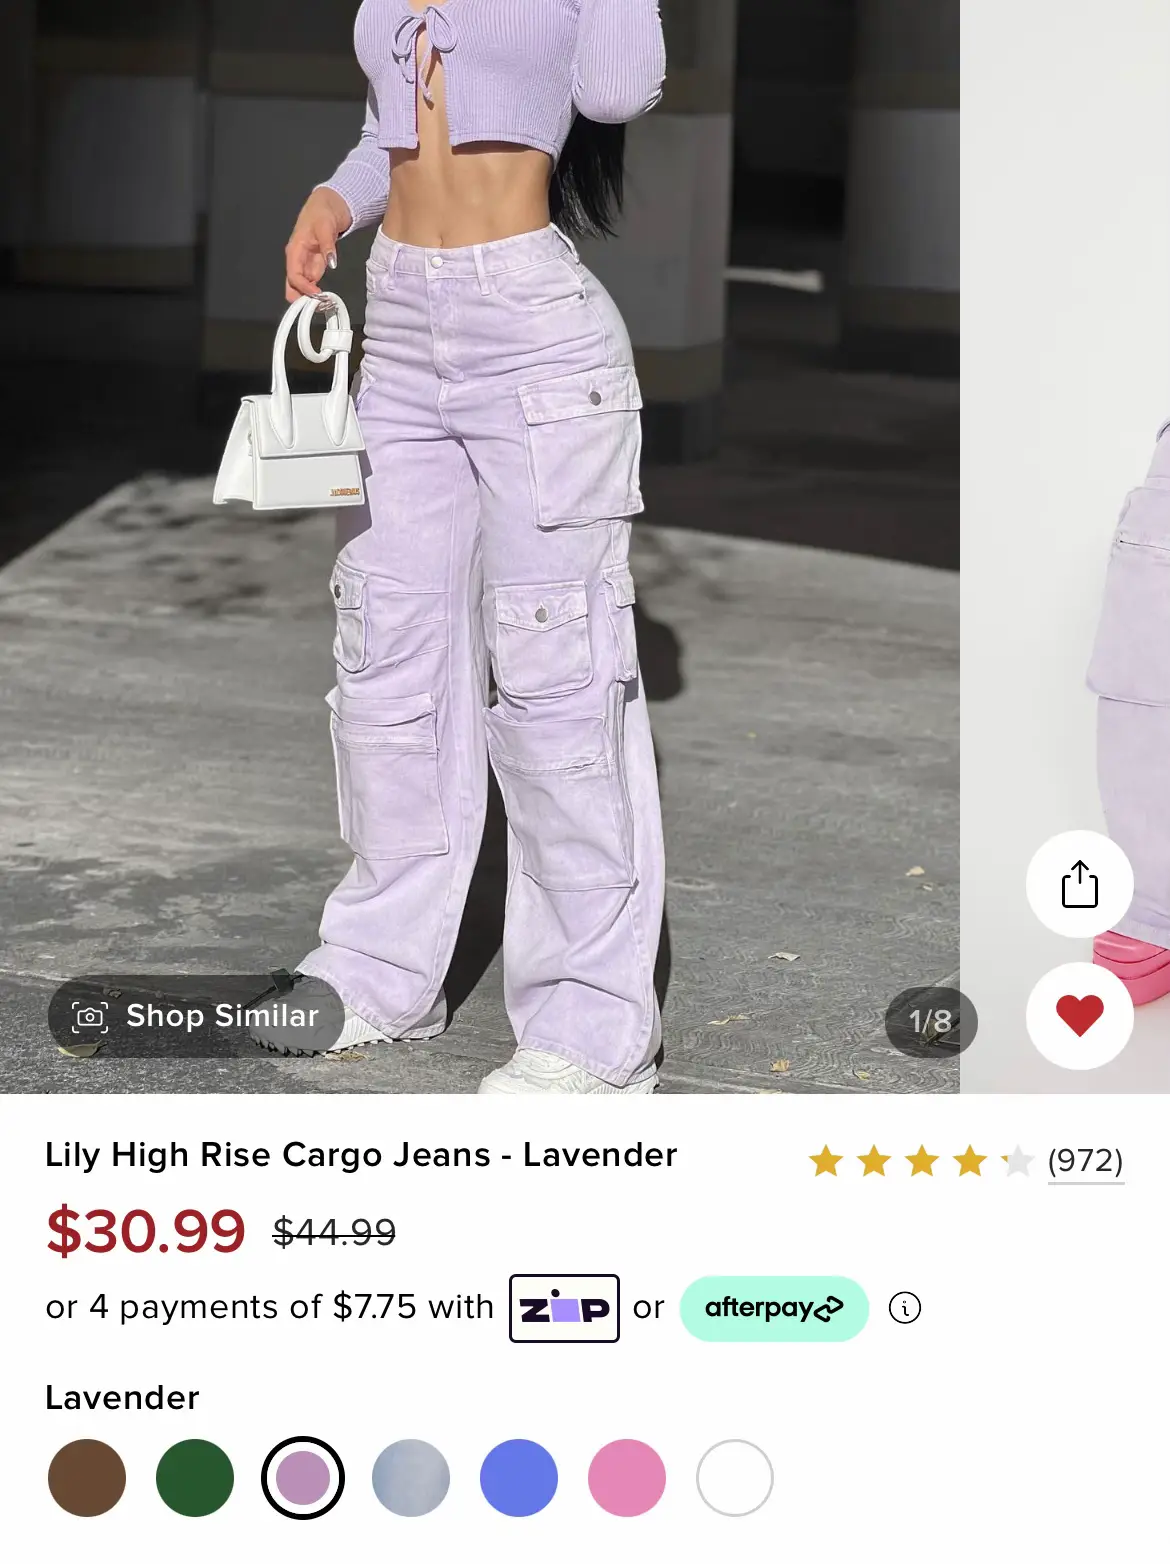 Lily High Rise Cargo Jeans - Lavender